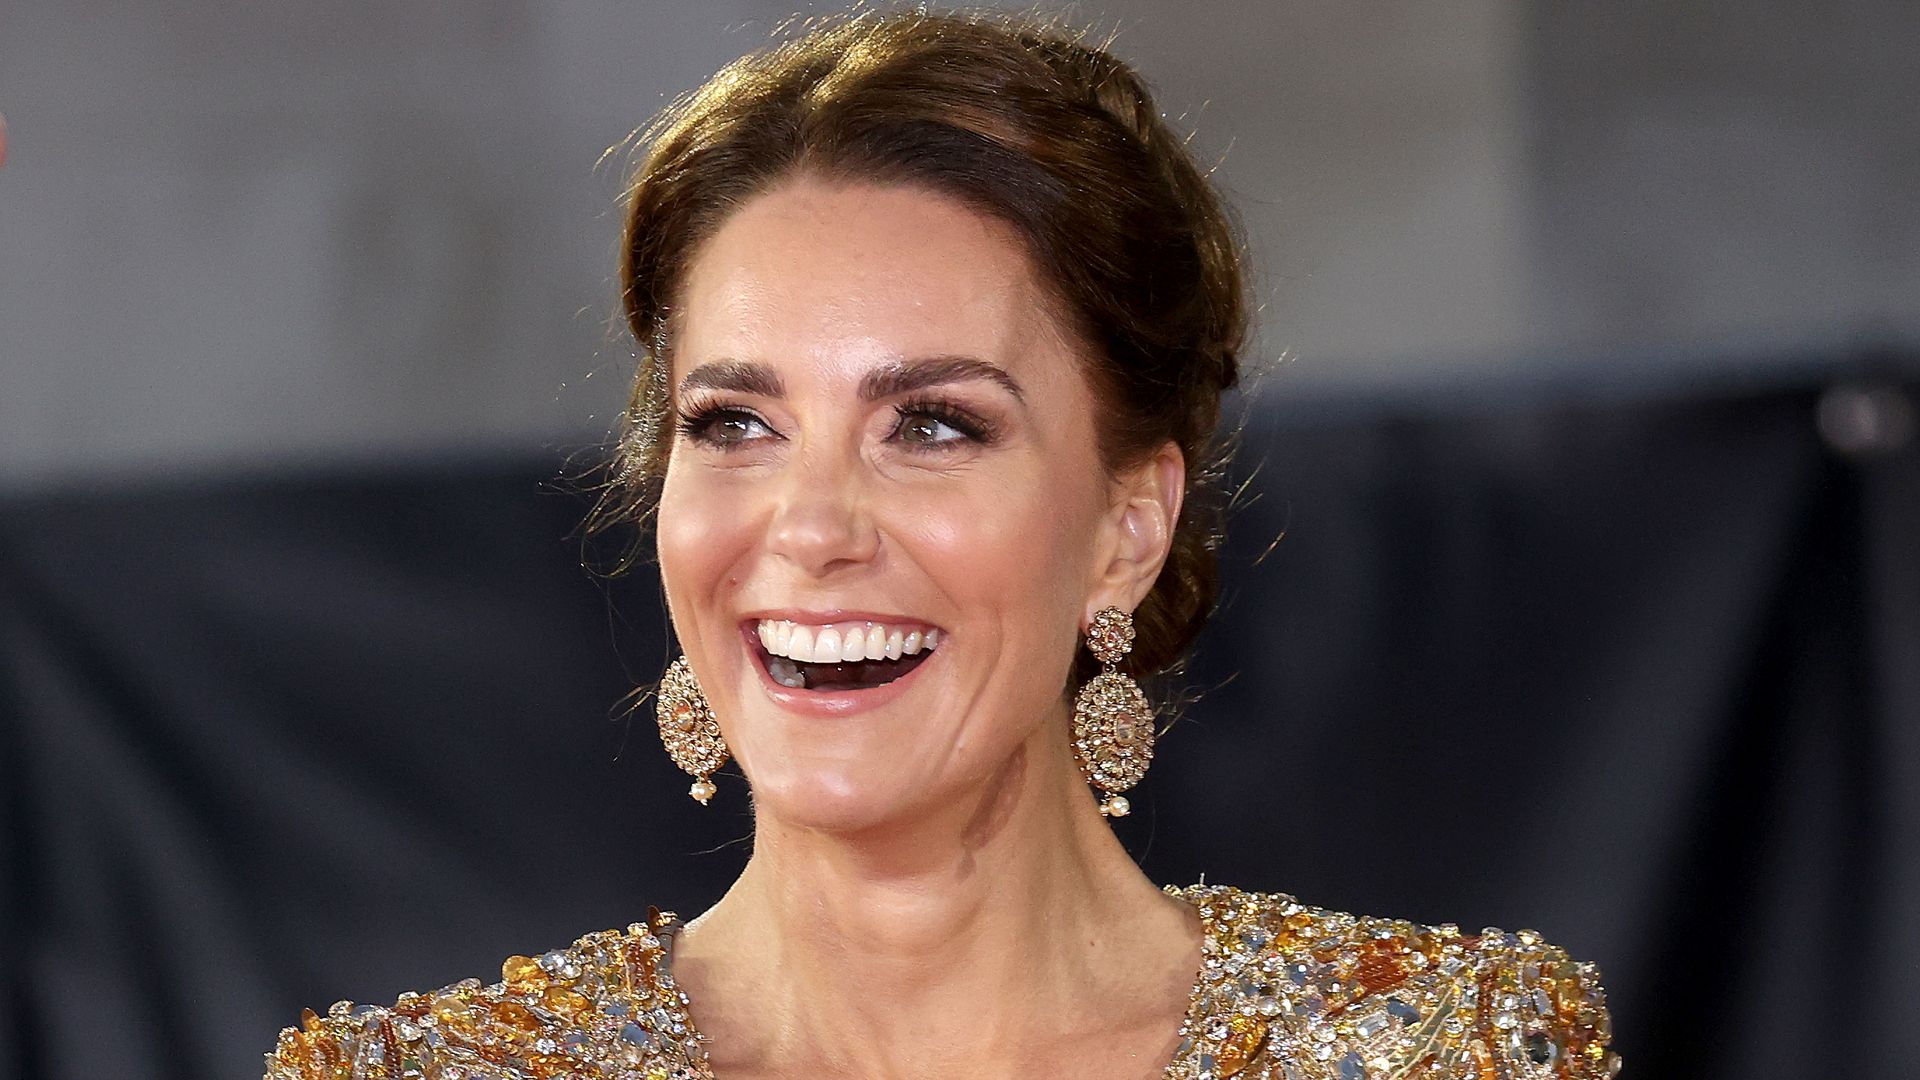 Kate Middleton Princess of Wales at No Time To Die premiere at Royal Albert Hall in 2021